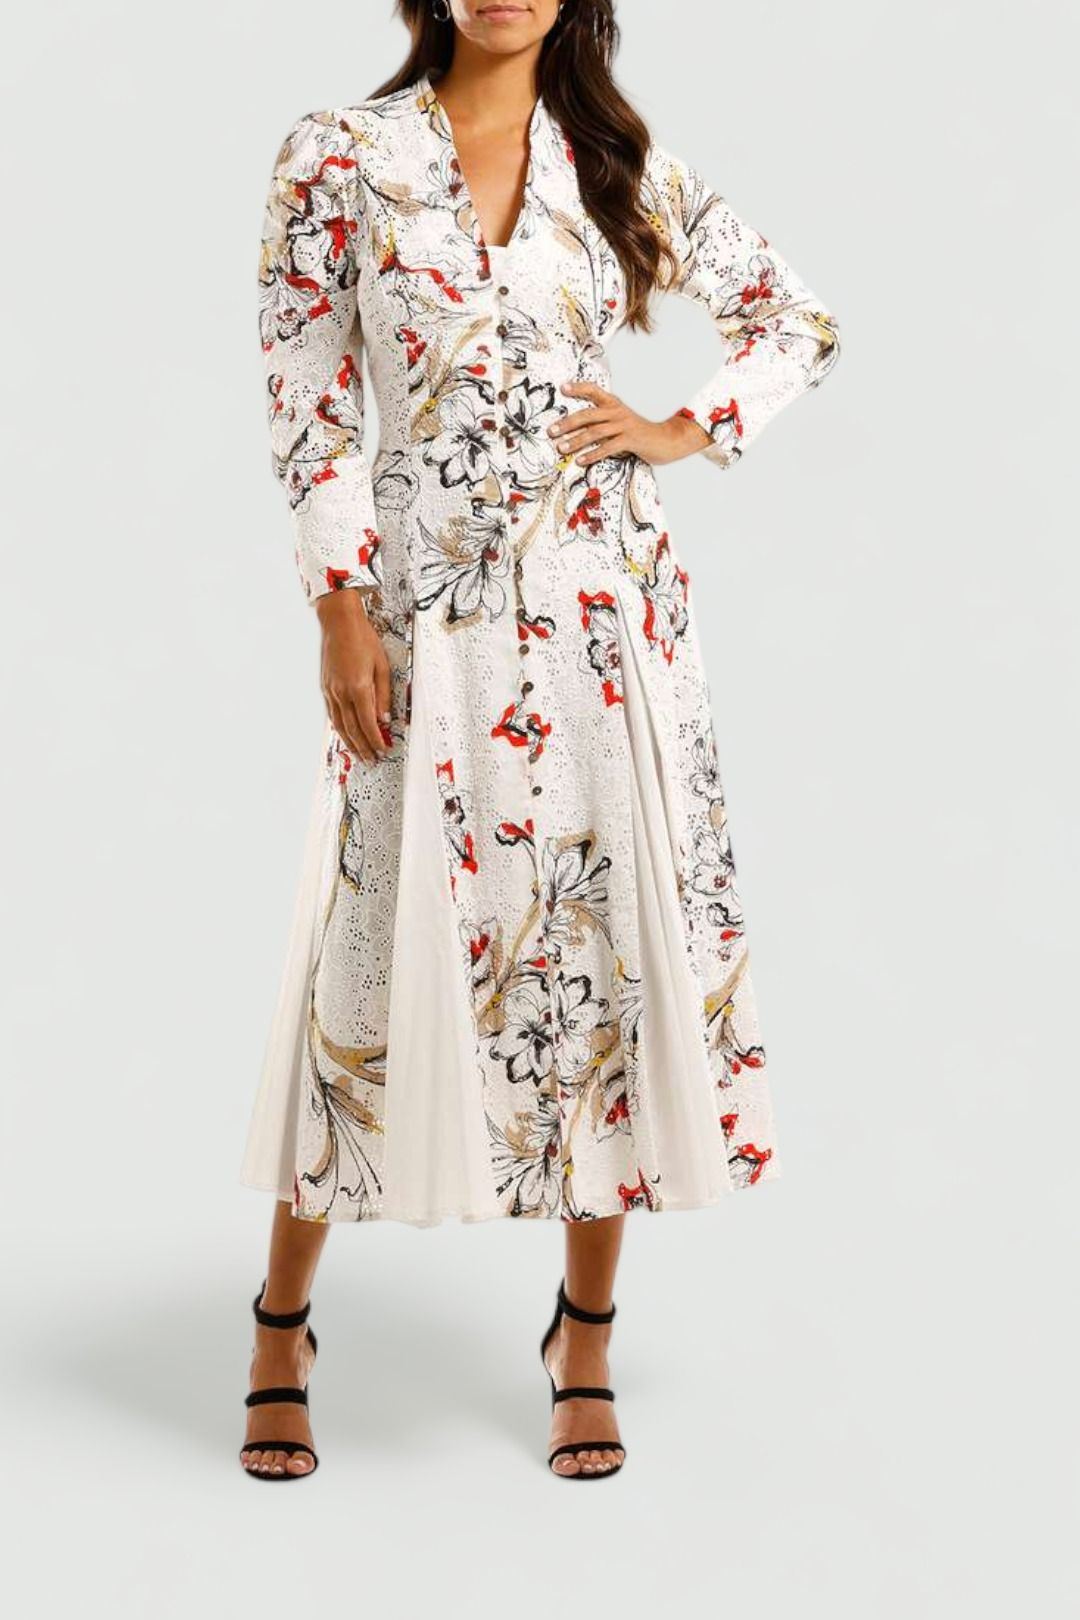 Moss and Spy Louise Button Dress Floral